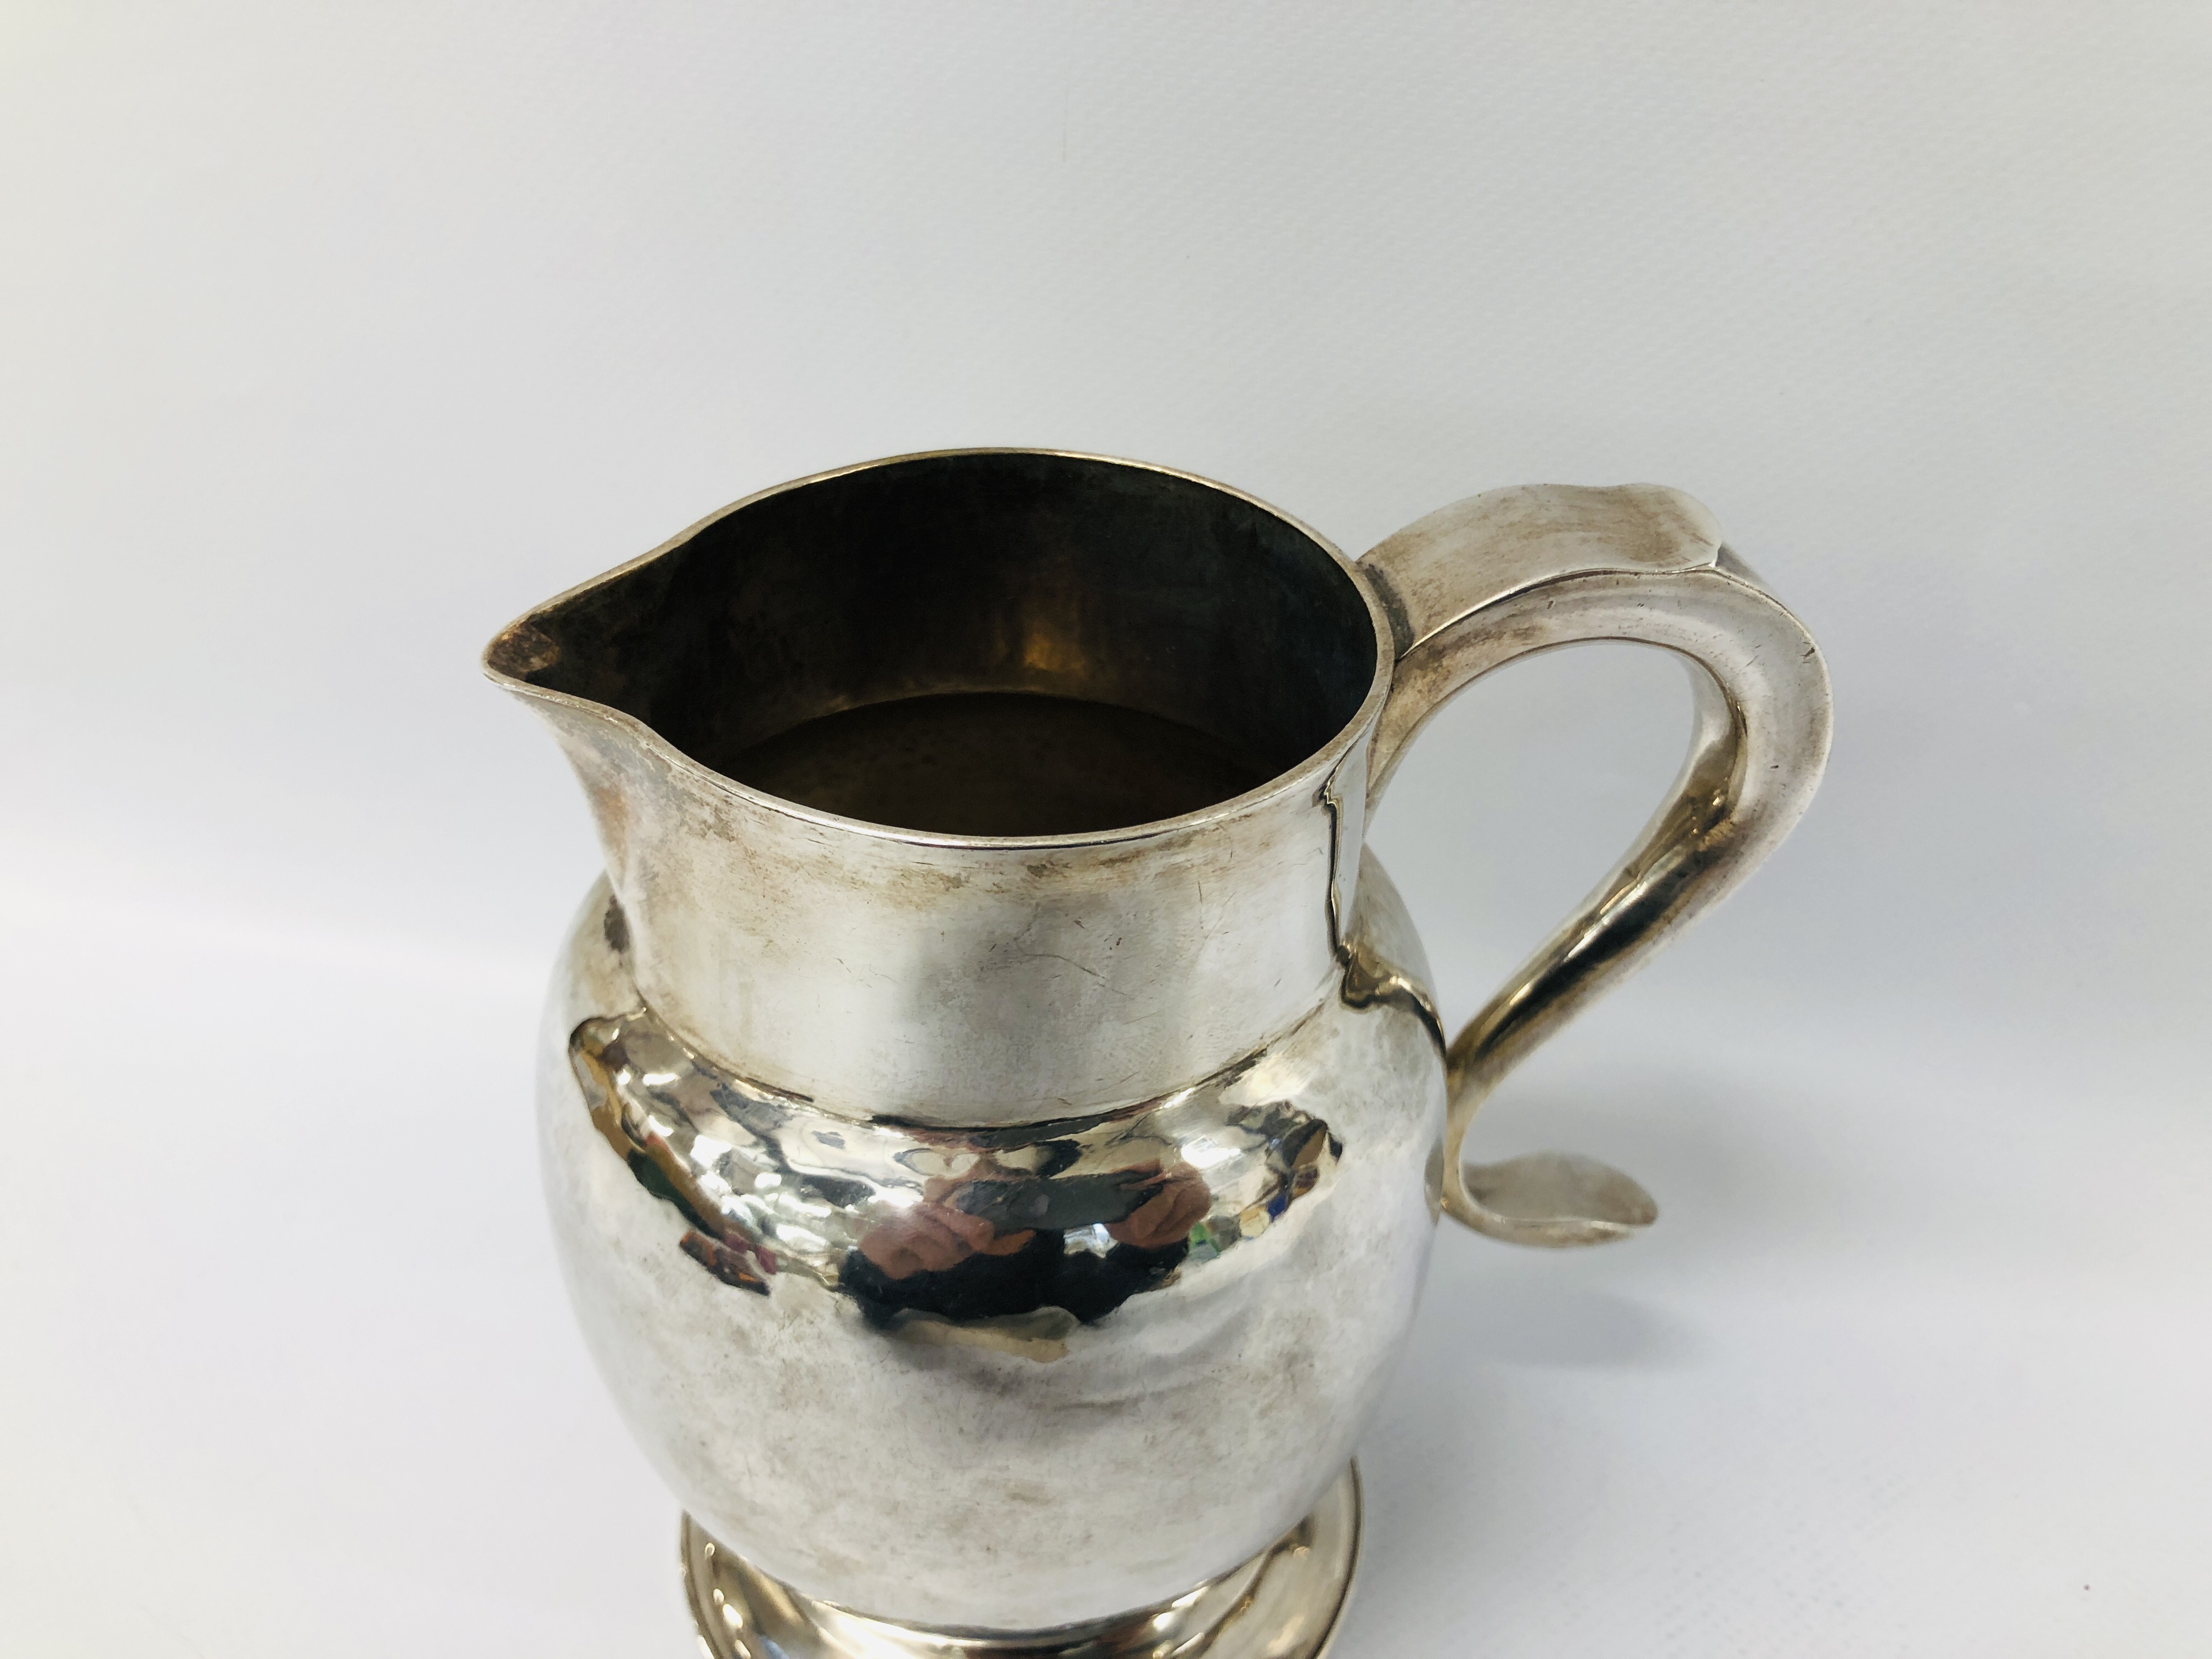 A GEORGE III SILVER JUG, THE 'S' SHAPED HANDLE ON A PLAIN BULBOUS BODY, NEWCASTLE 1790, J. - Image 2 of 21